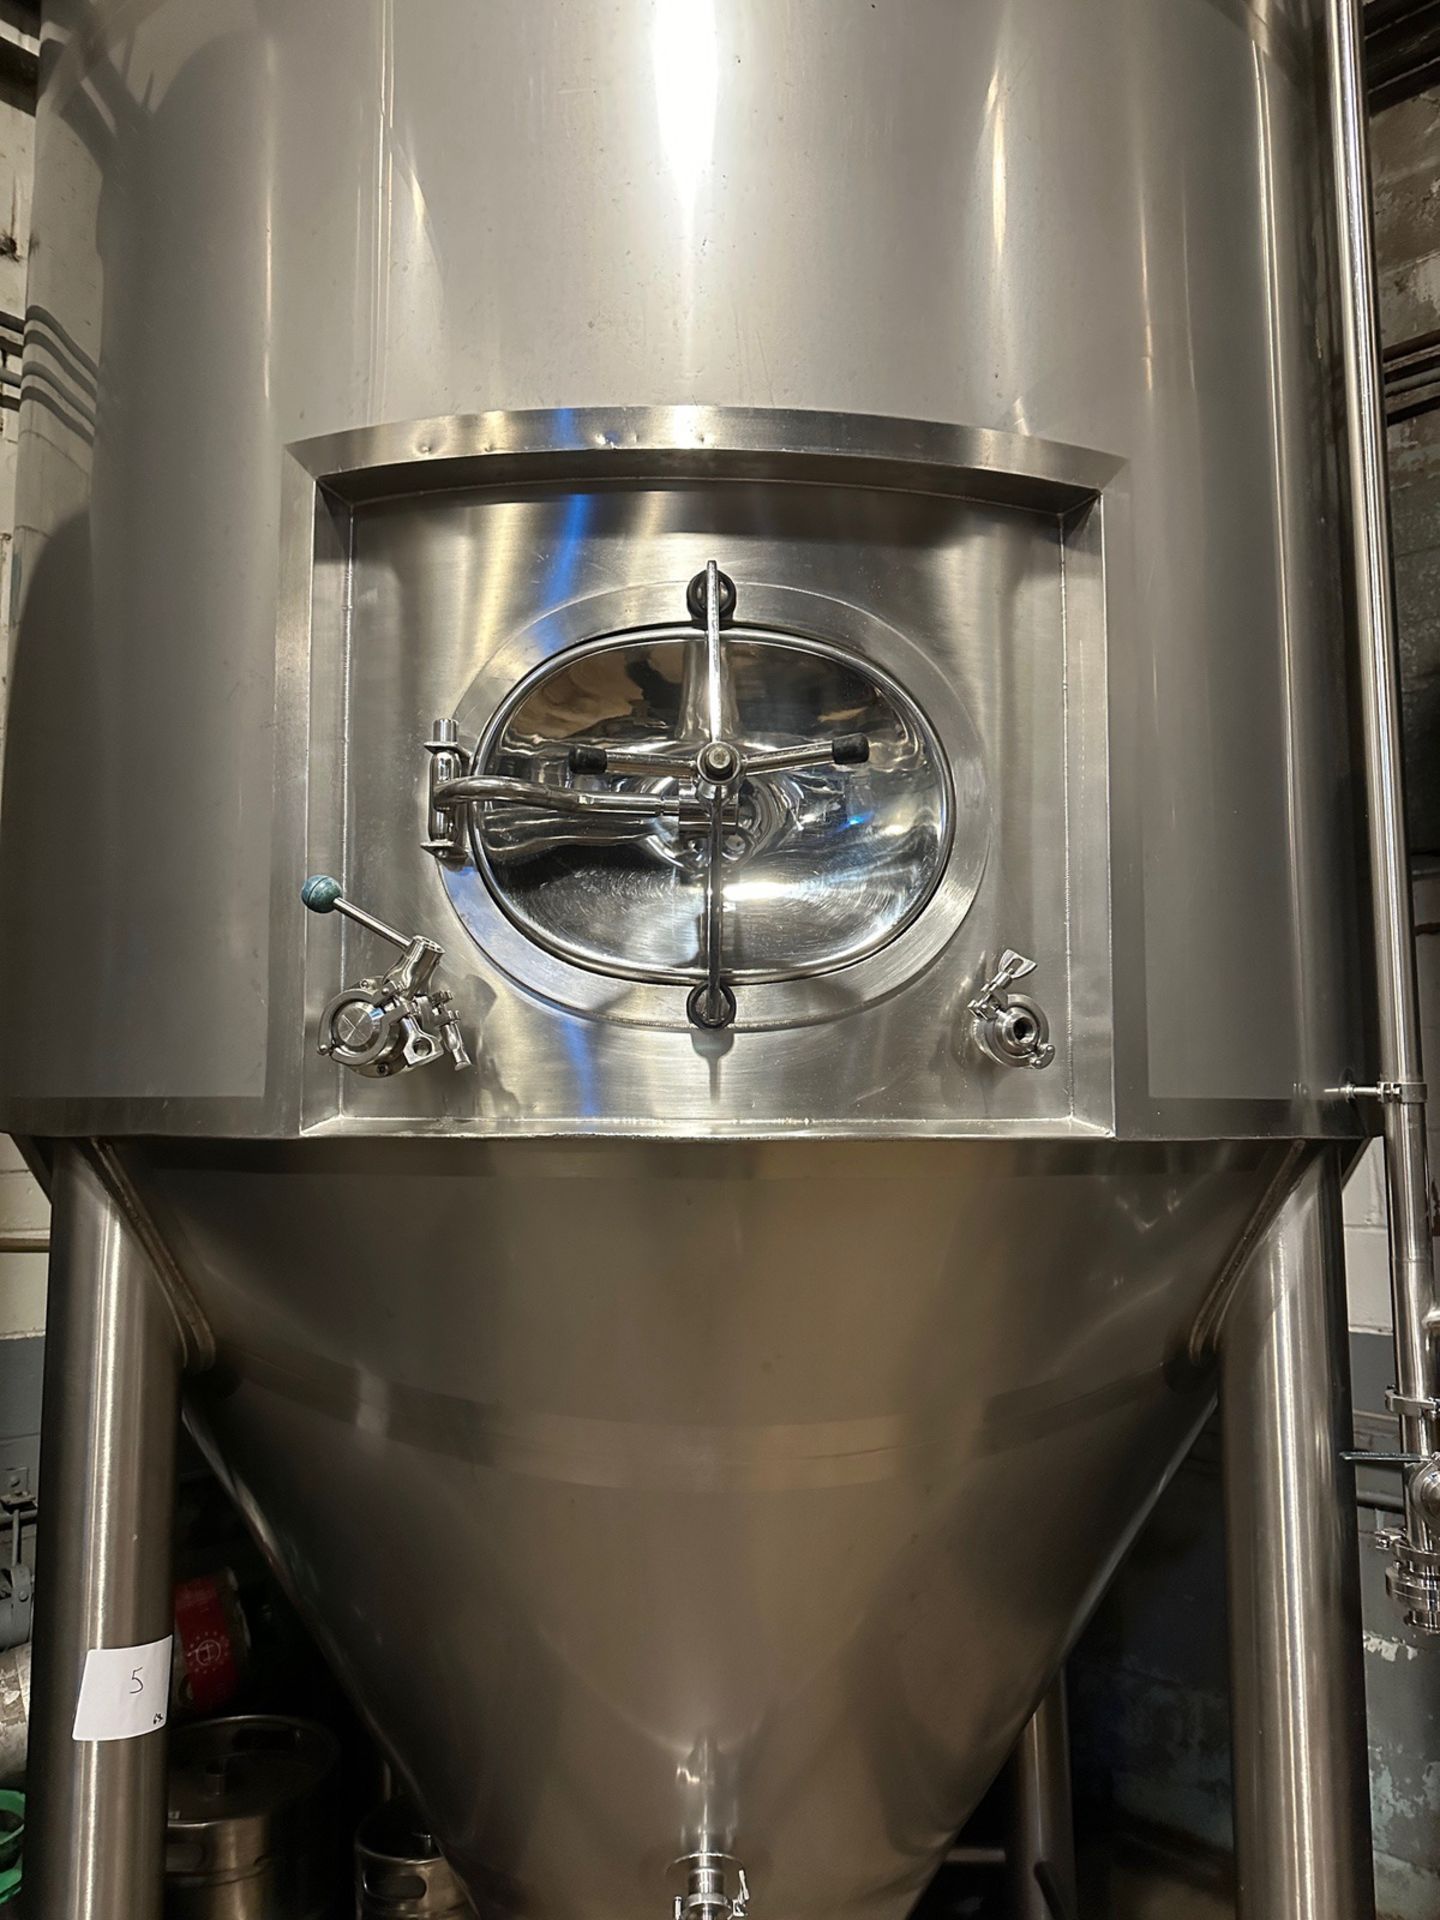 Bavarian Brew Tech 60 BBL Fermenter, Glycol Jacketed, Approx 14'-6" H x 6'-6" OD (M | Rig Fee $2250 - Image 3 of 3